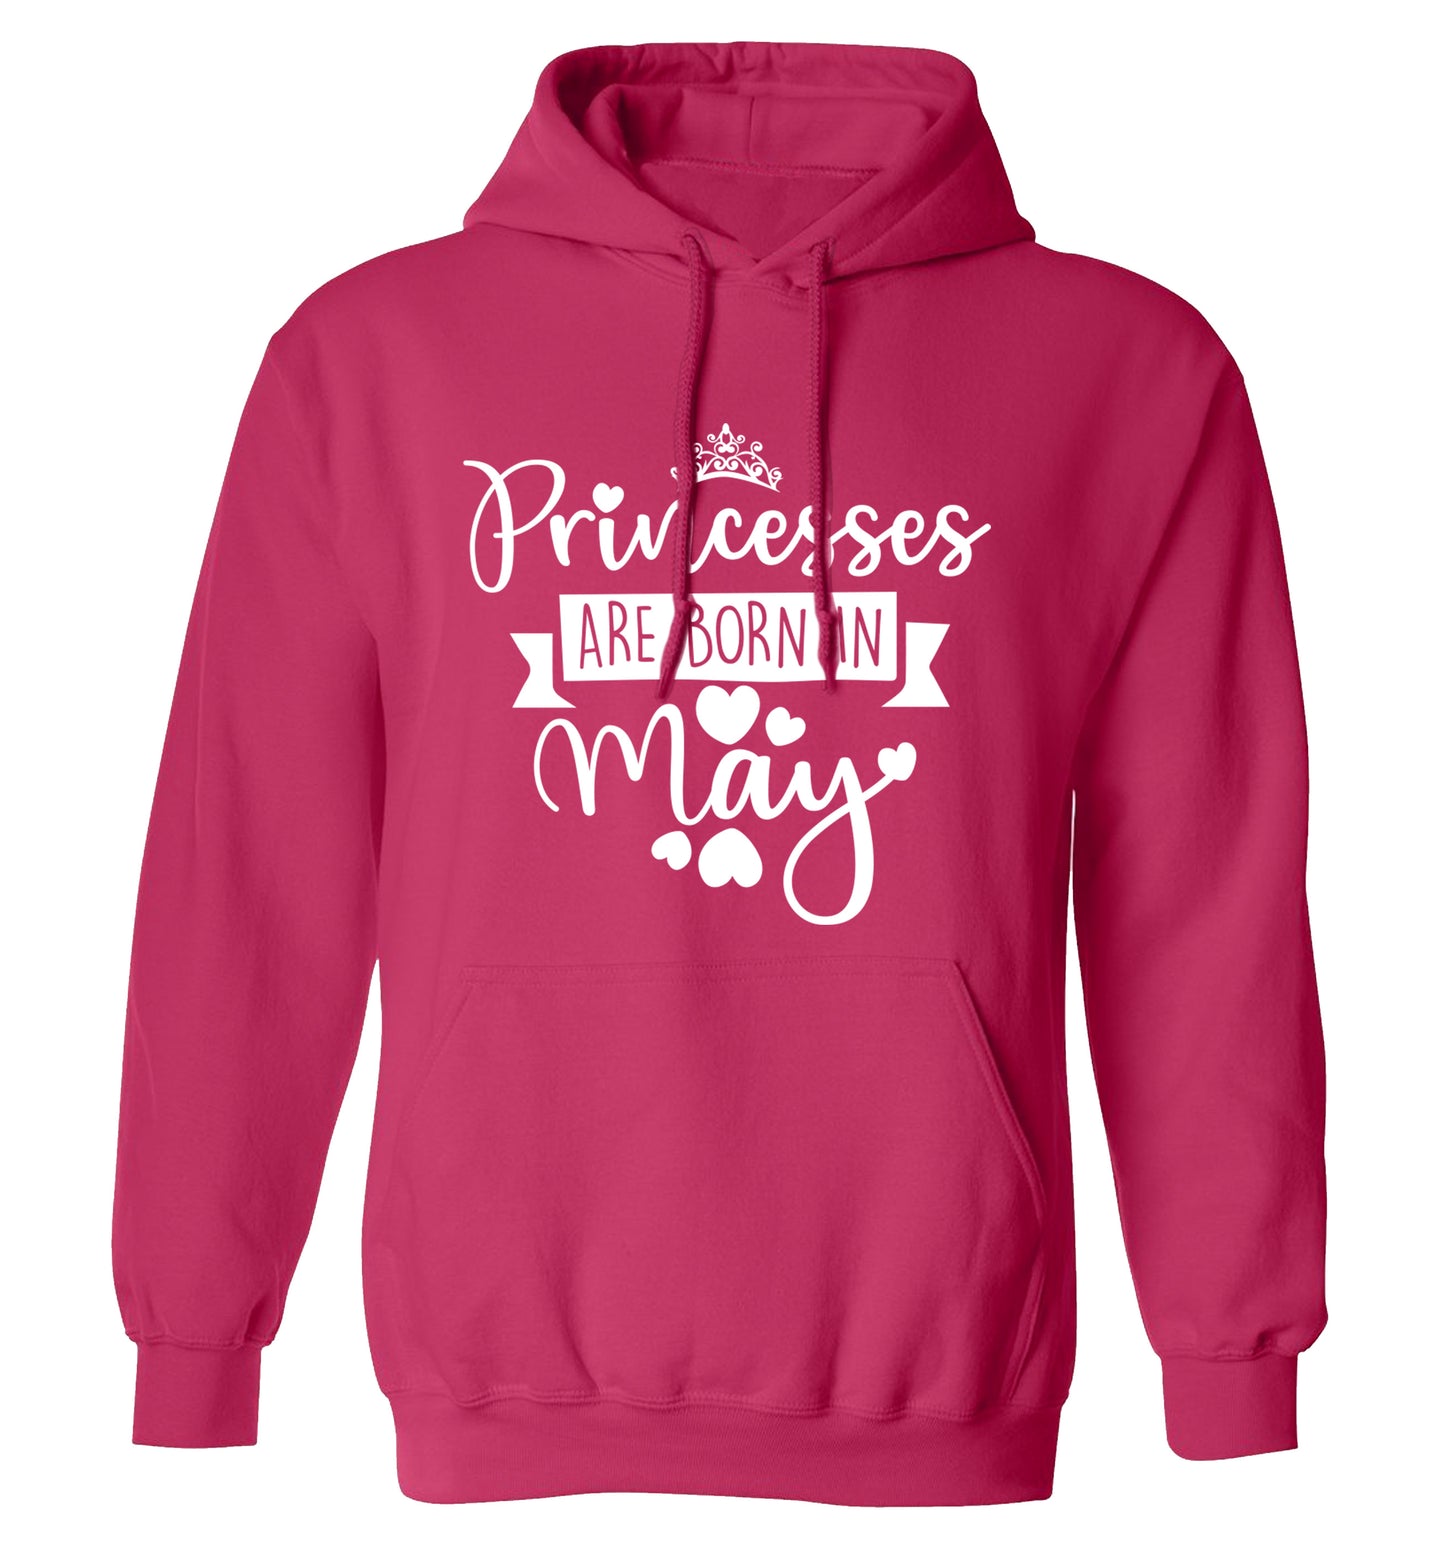 Princesses are born in May adults unisex pink hoodie 2XL